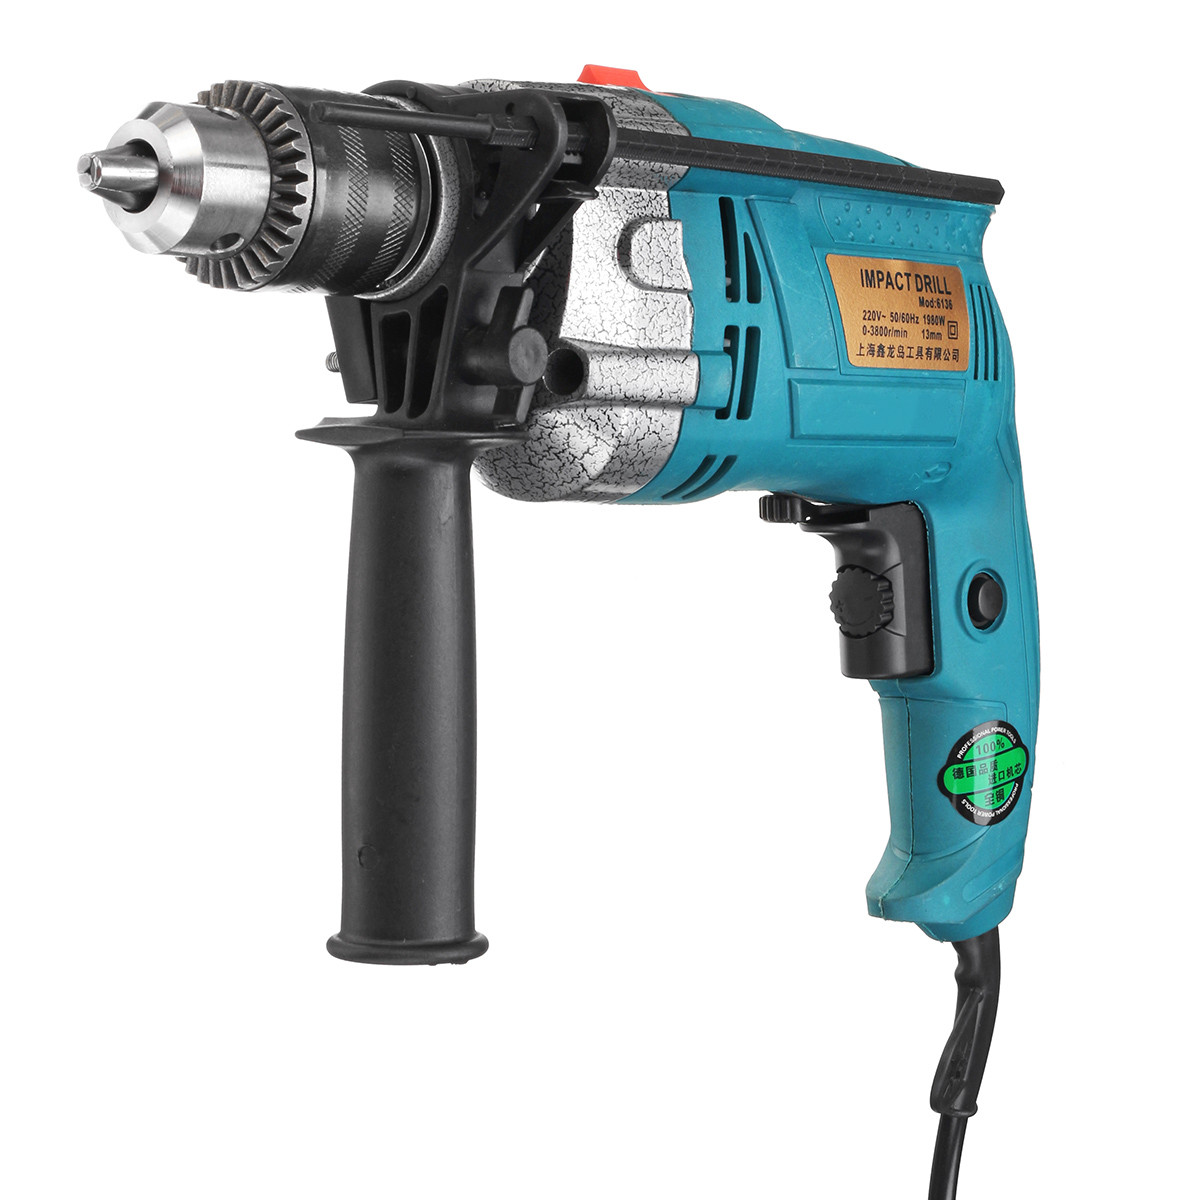 1980W-3800rpm-Electric-Impact-Drill-360deg-Rotary-Skid-Proof-Handle-With-Depth-Measuring-Scale-Spina-1715301-7